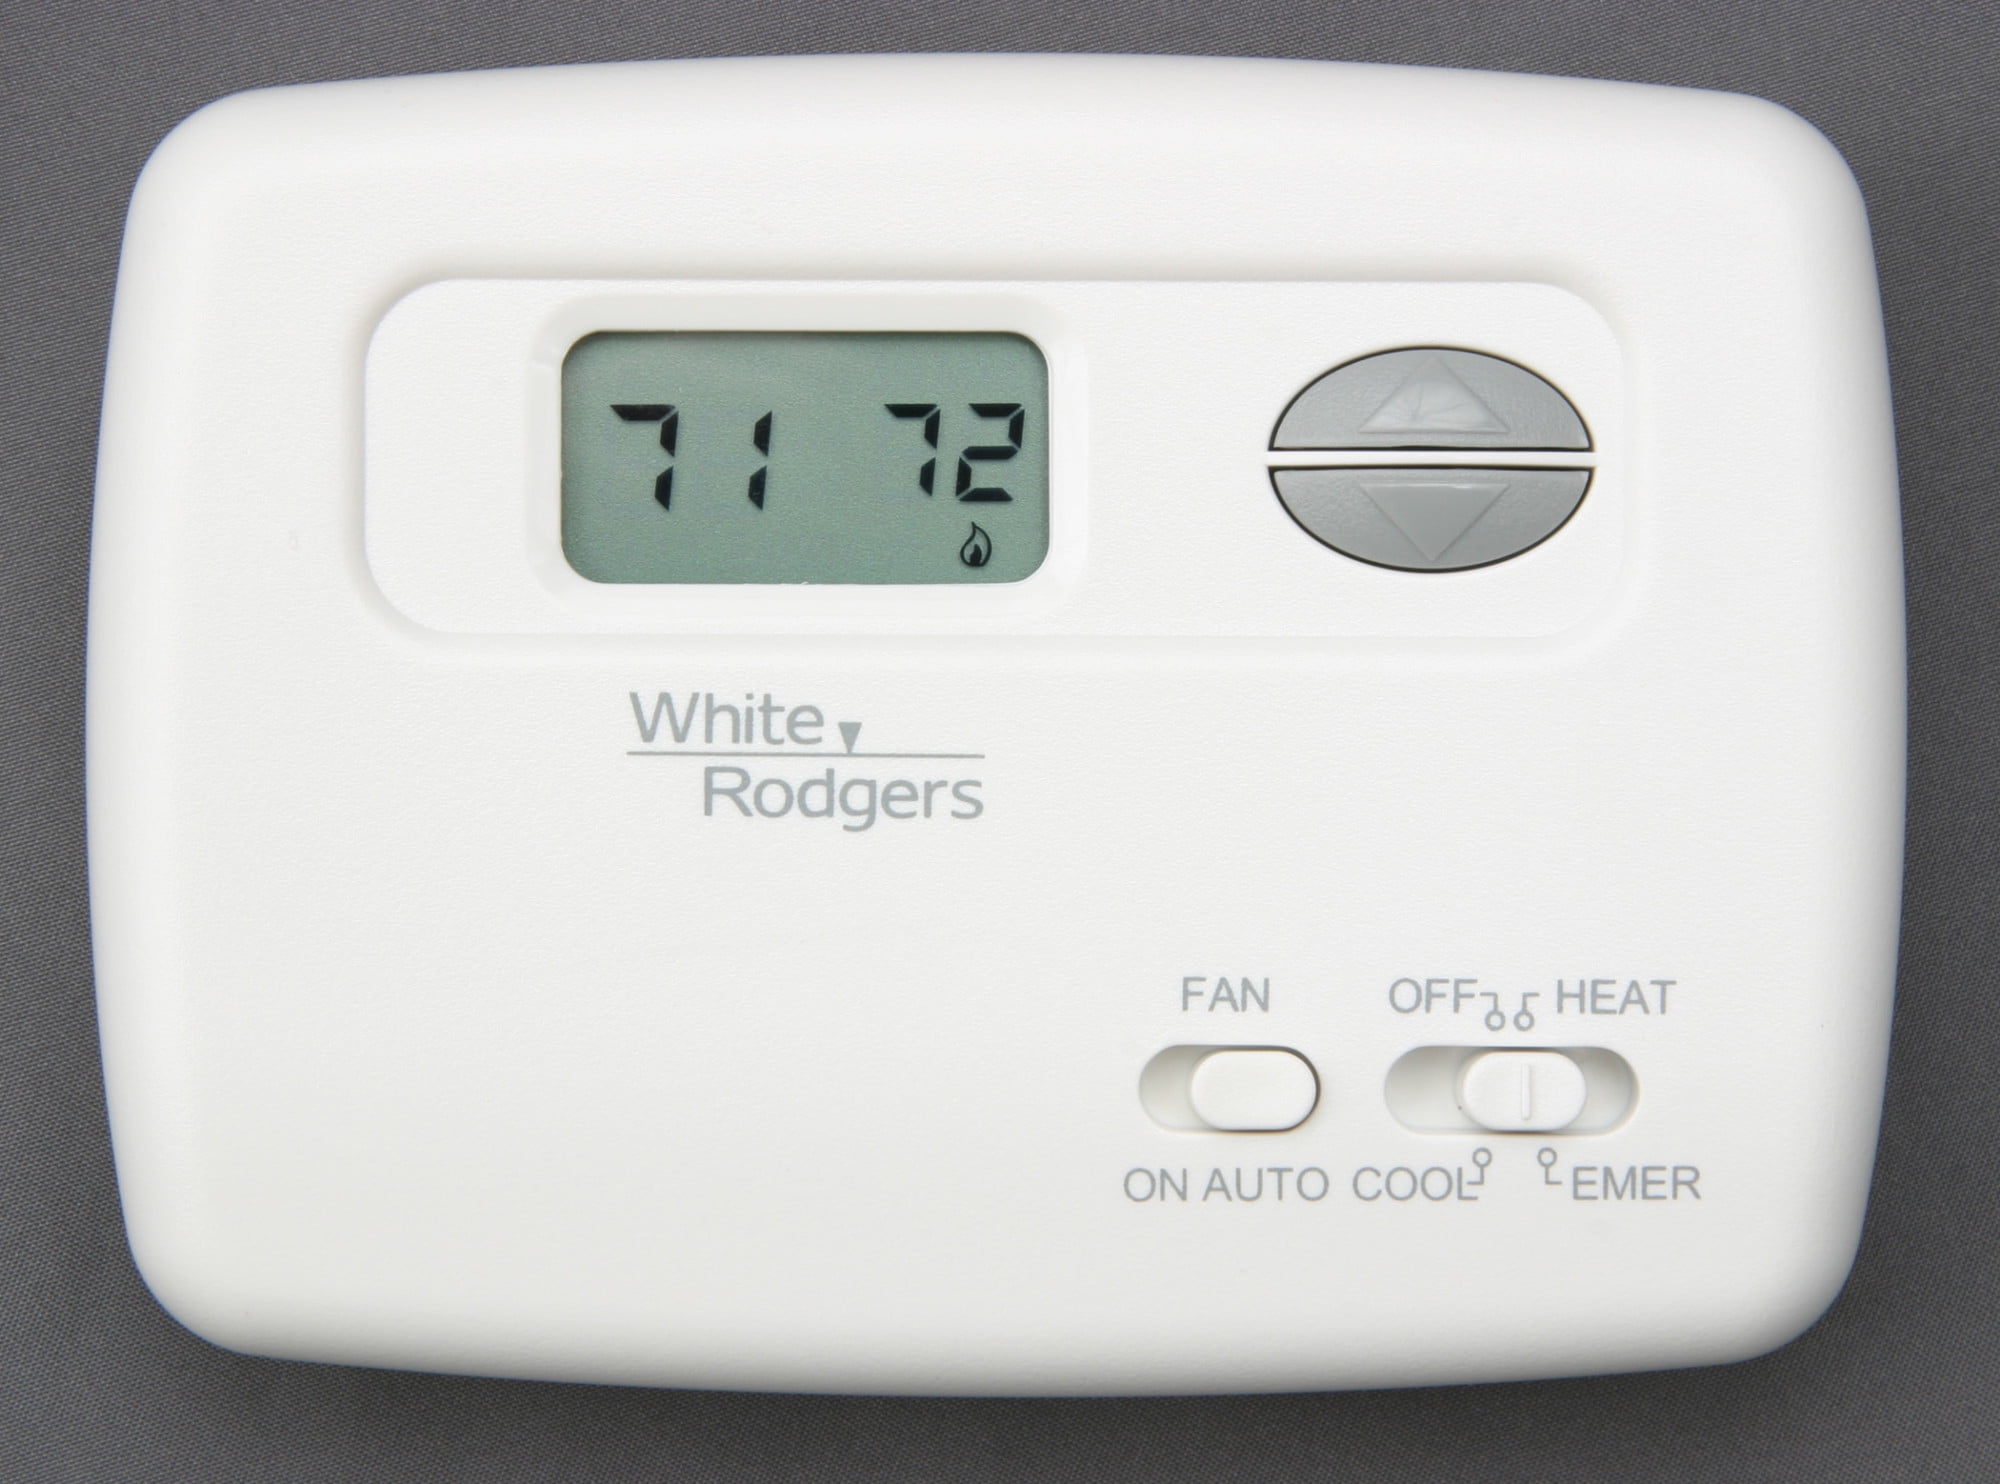 White rodgers thermostat troubleshooting